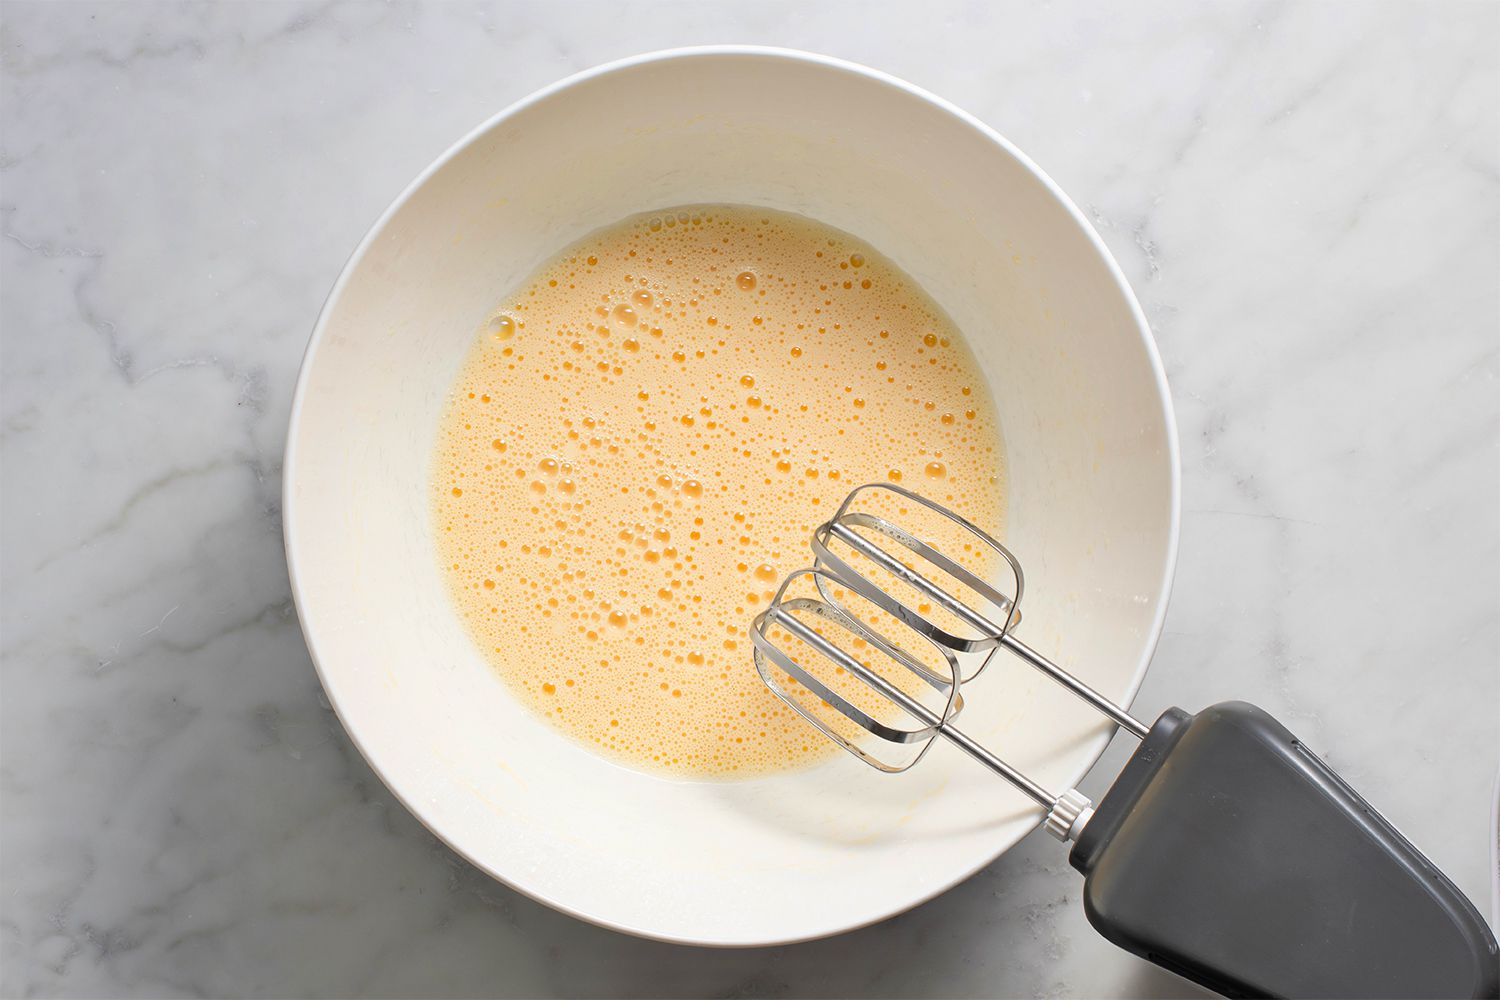 Egg and vegetable oil mixture in a bowl, next to a hand mixer 